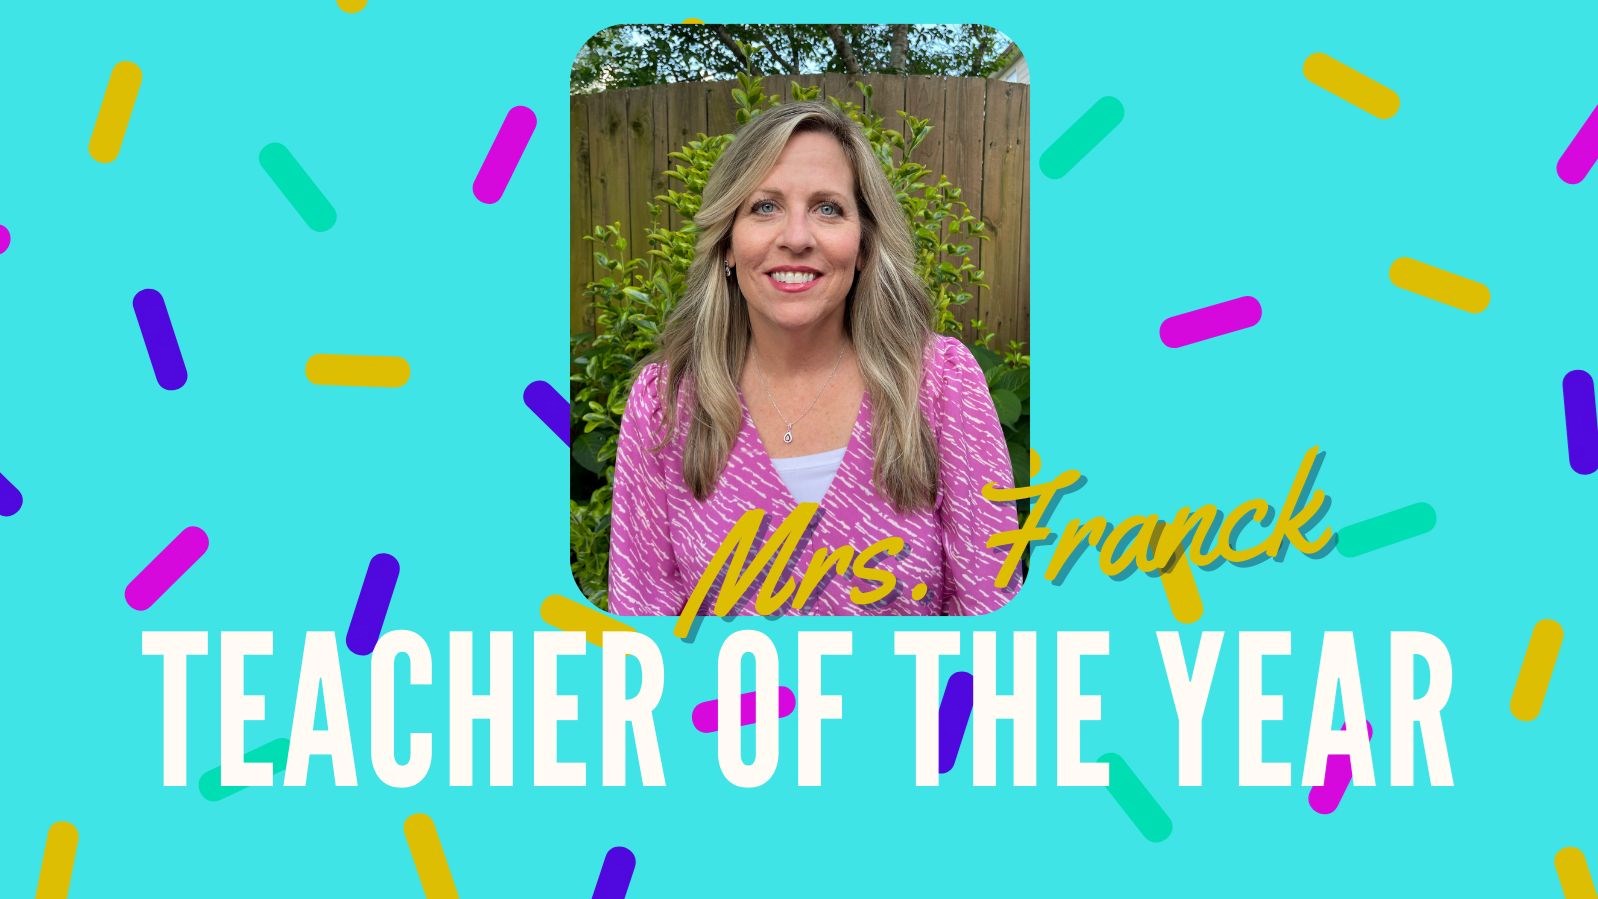 Light blue background with confetti. Text reads: Teacher of the Year, Mrs. Franck.